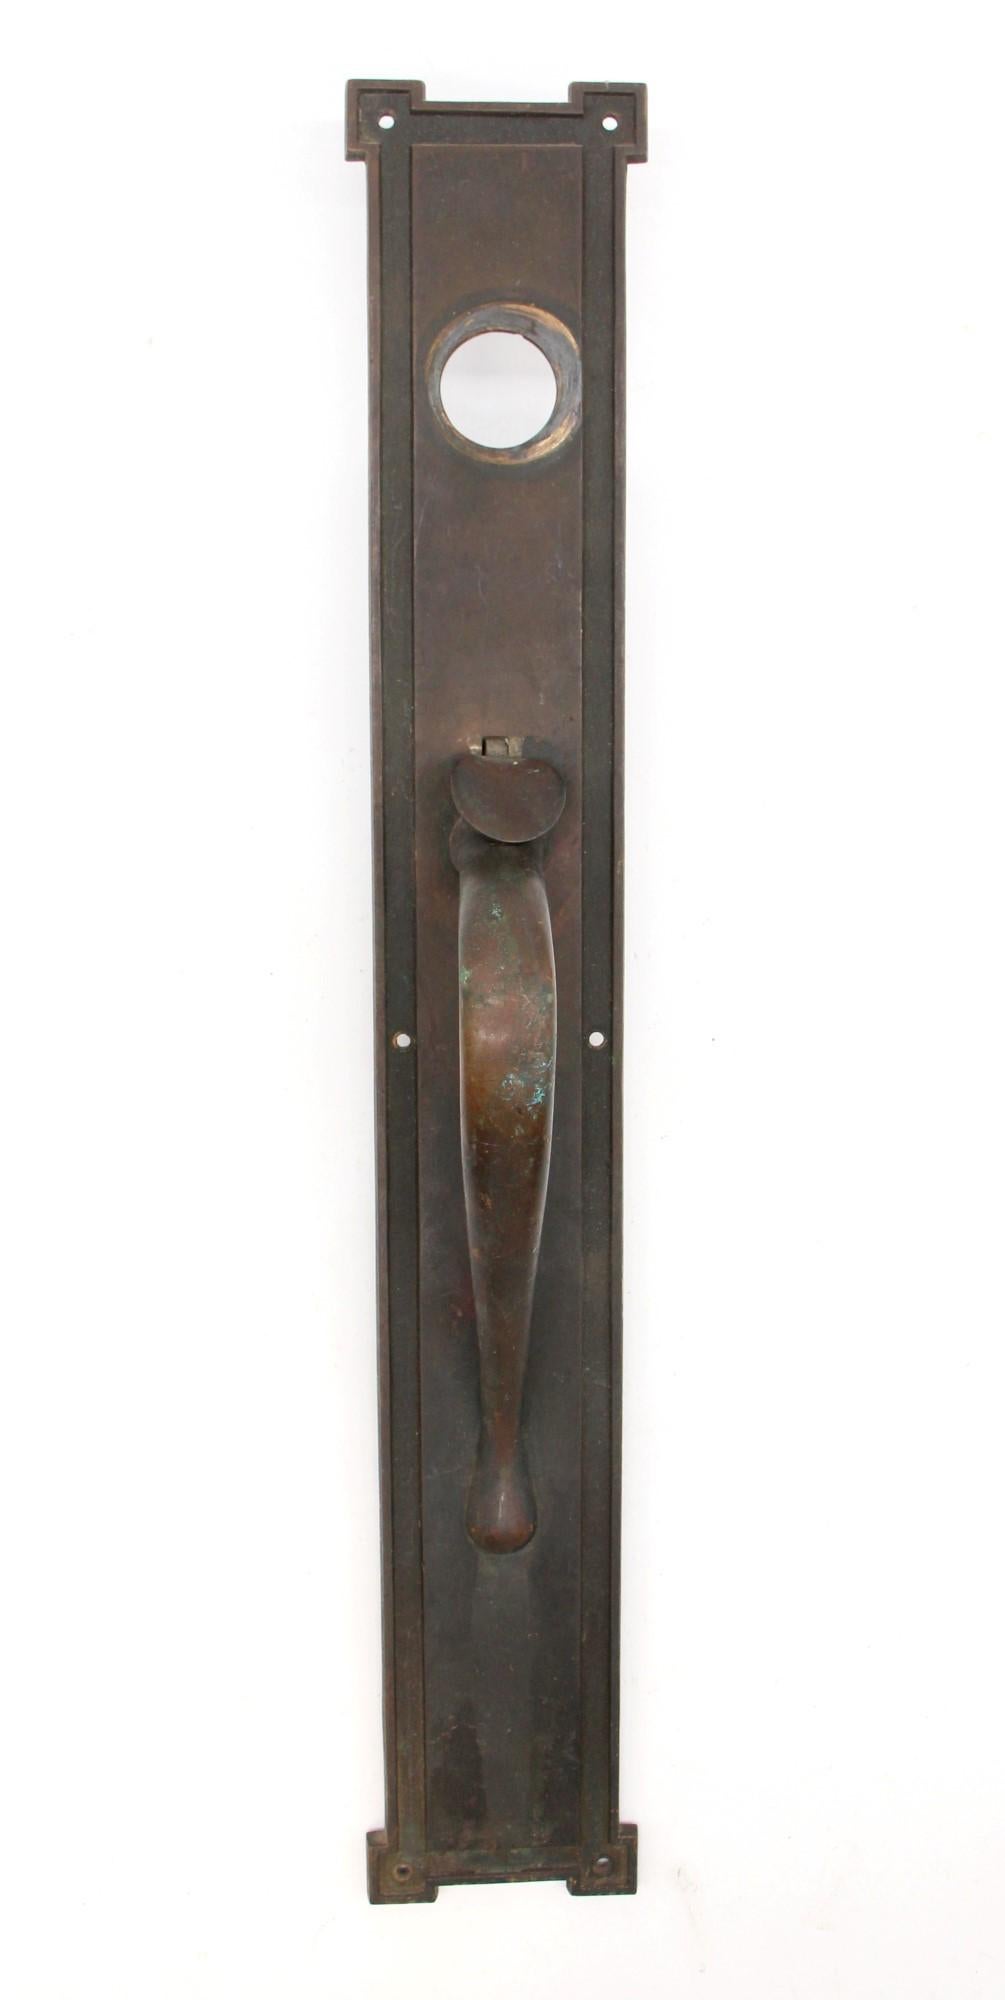 This is a simple matching pair of Arts & Crafts bronze door pulls with clean cut lines. These handles are 21.375 in. long, so they would work best with a large set of entry doors for a home or a great set for a restaurant application. The pair comes